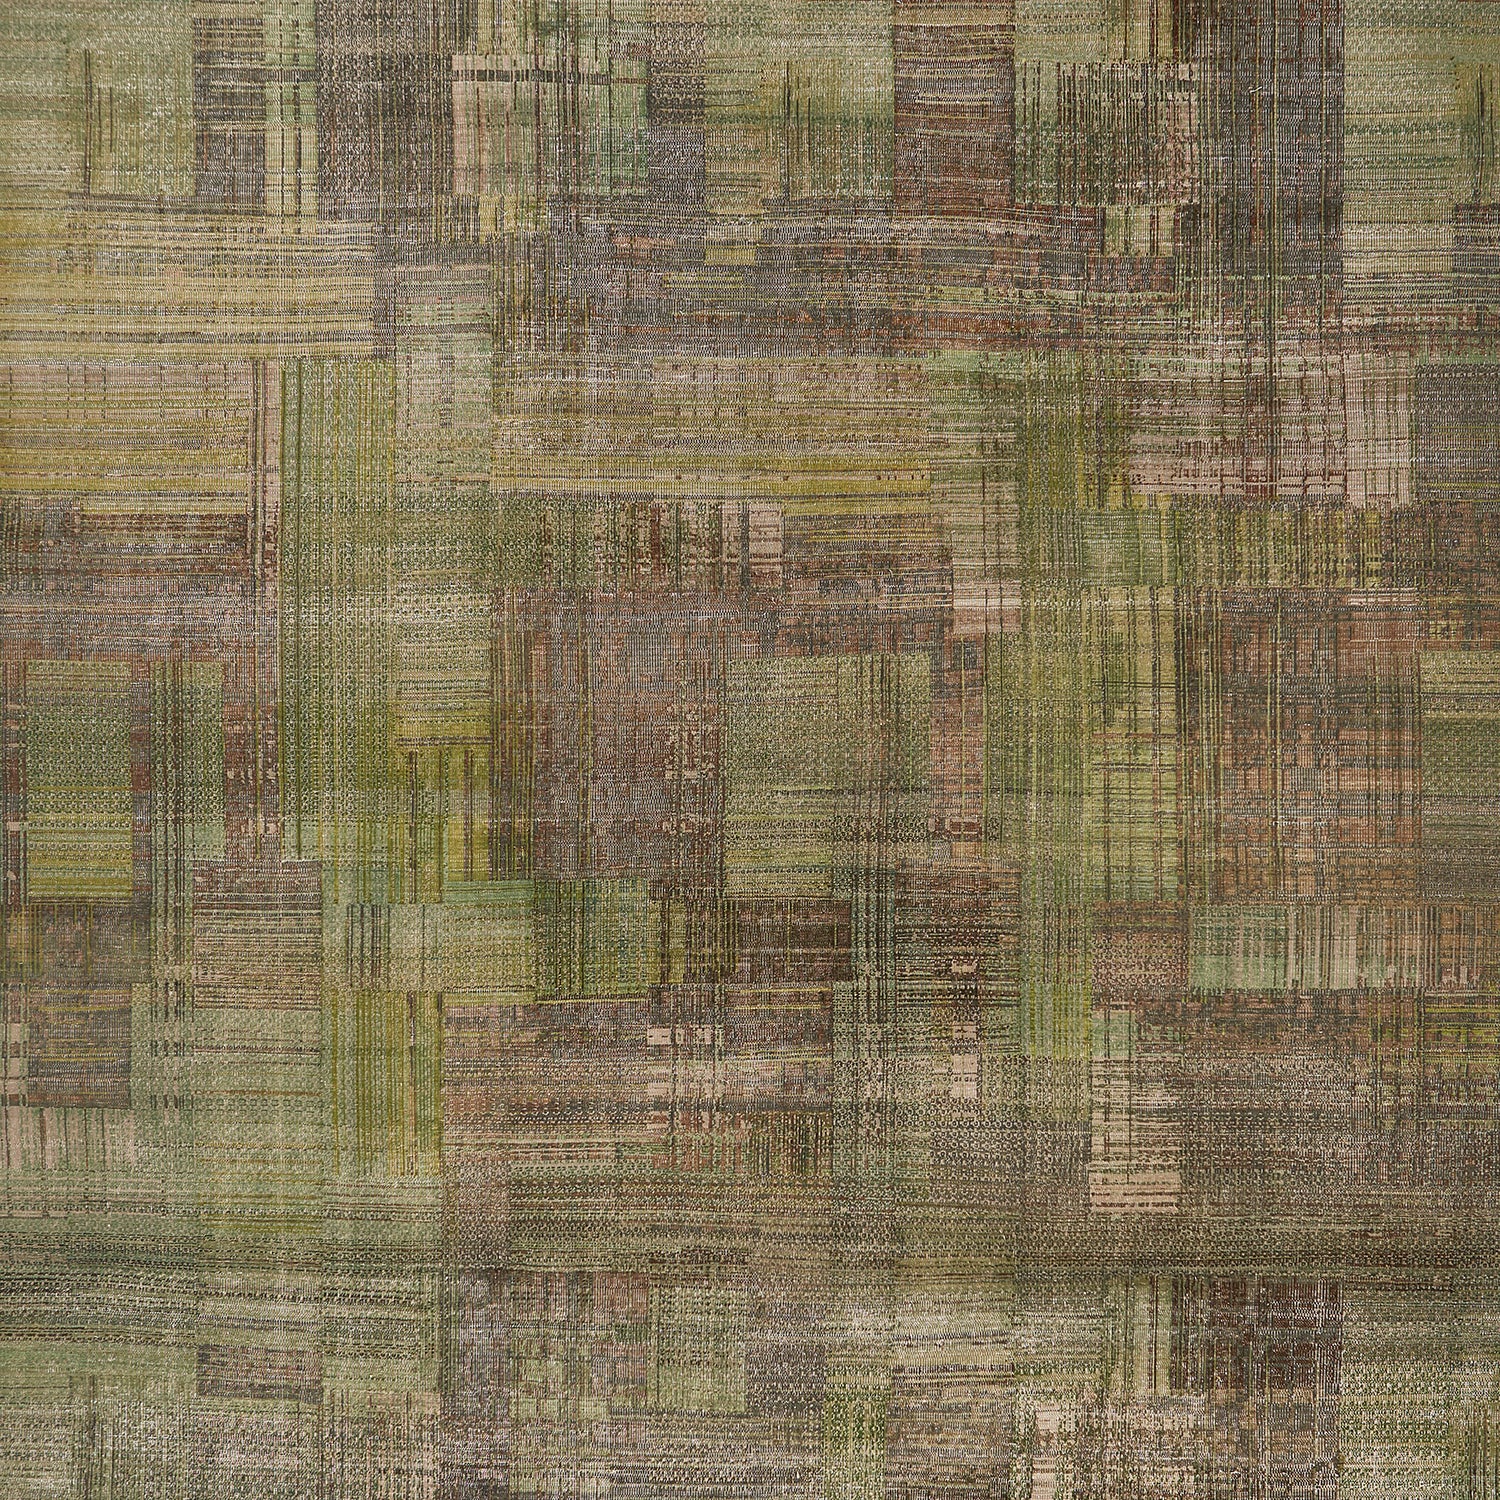 Abstract, earth-toned fabric-like pattern with intricate grid design.